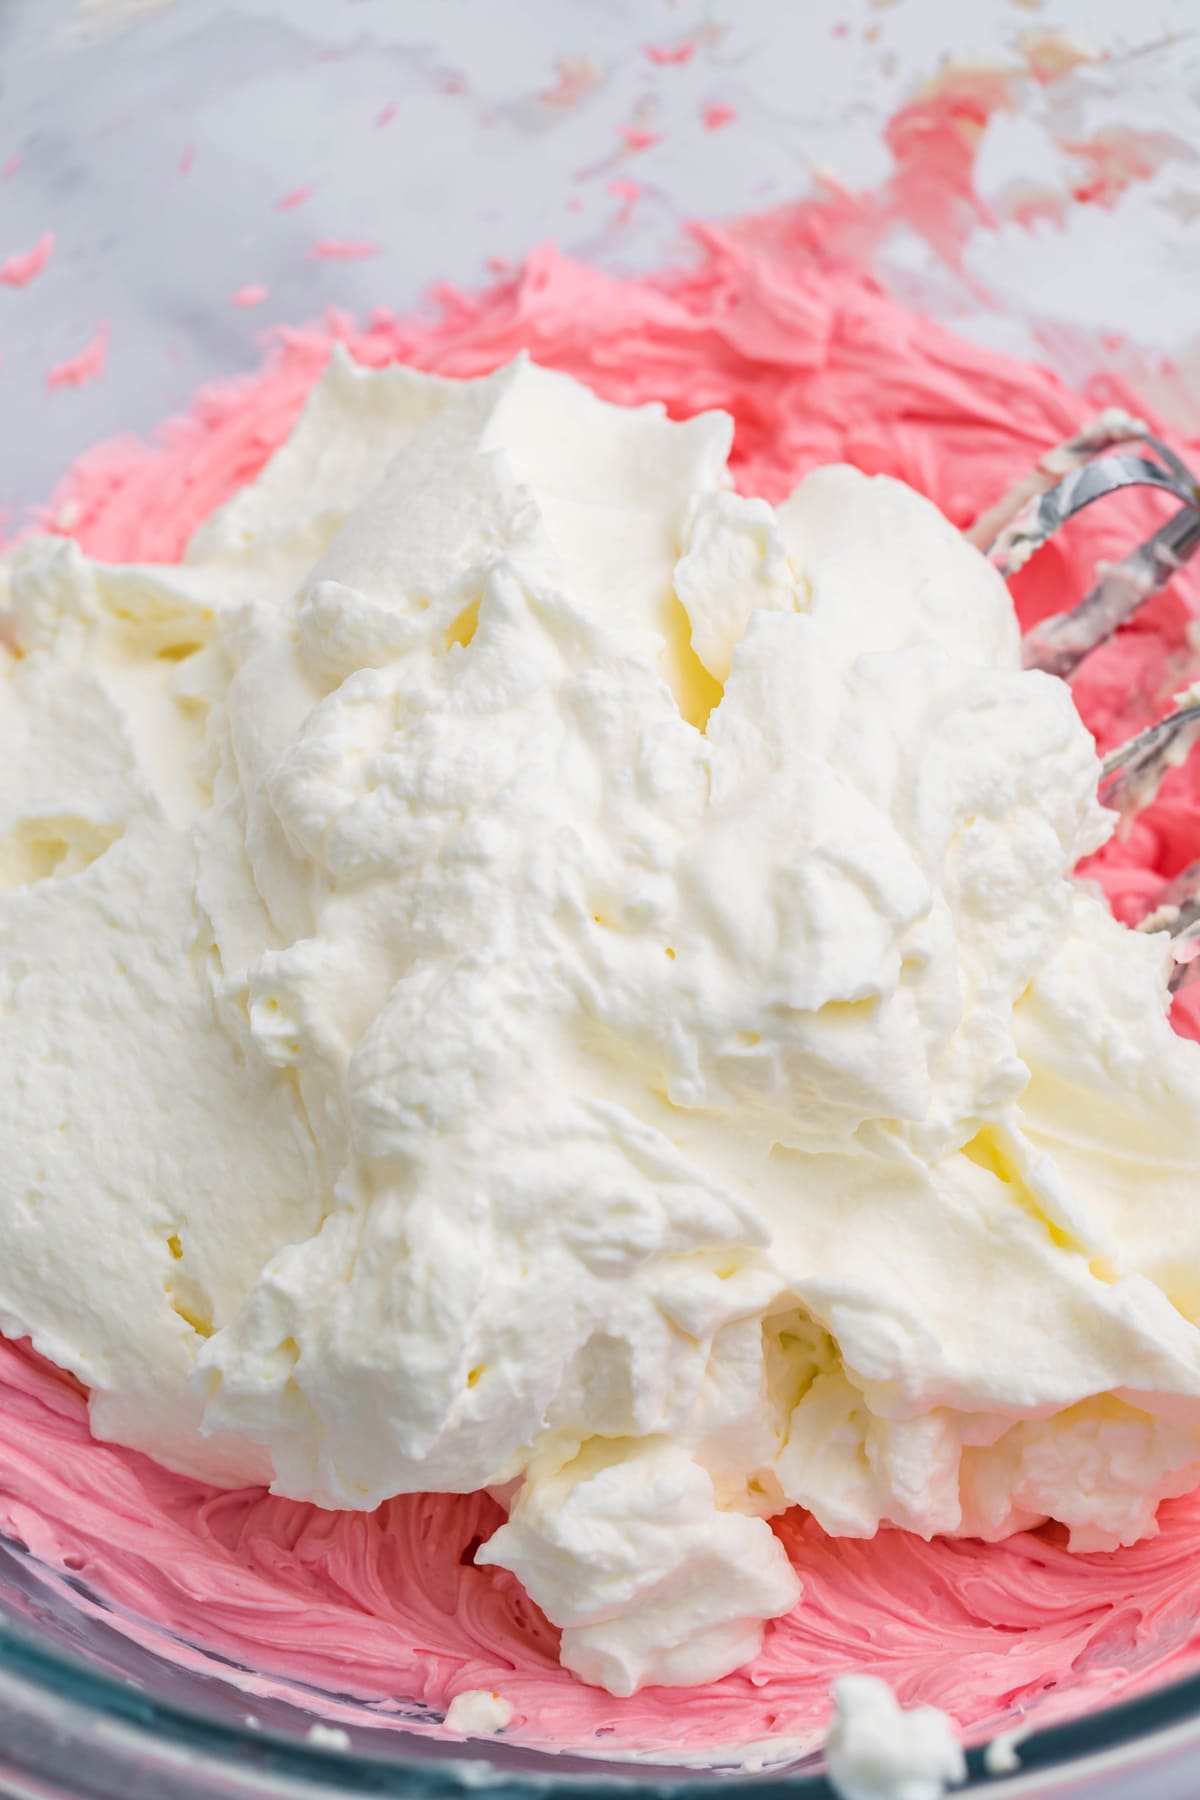 Red cream cheese and whipped cream in a mixing bowl